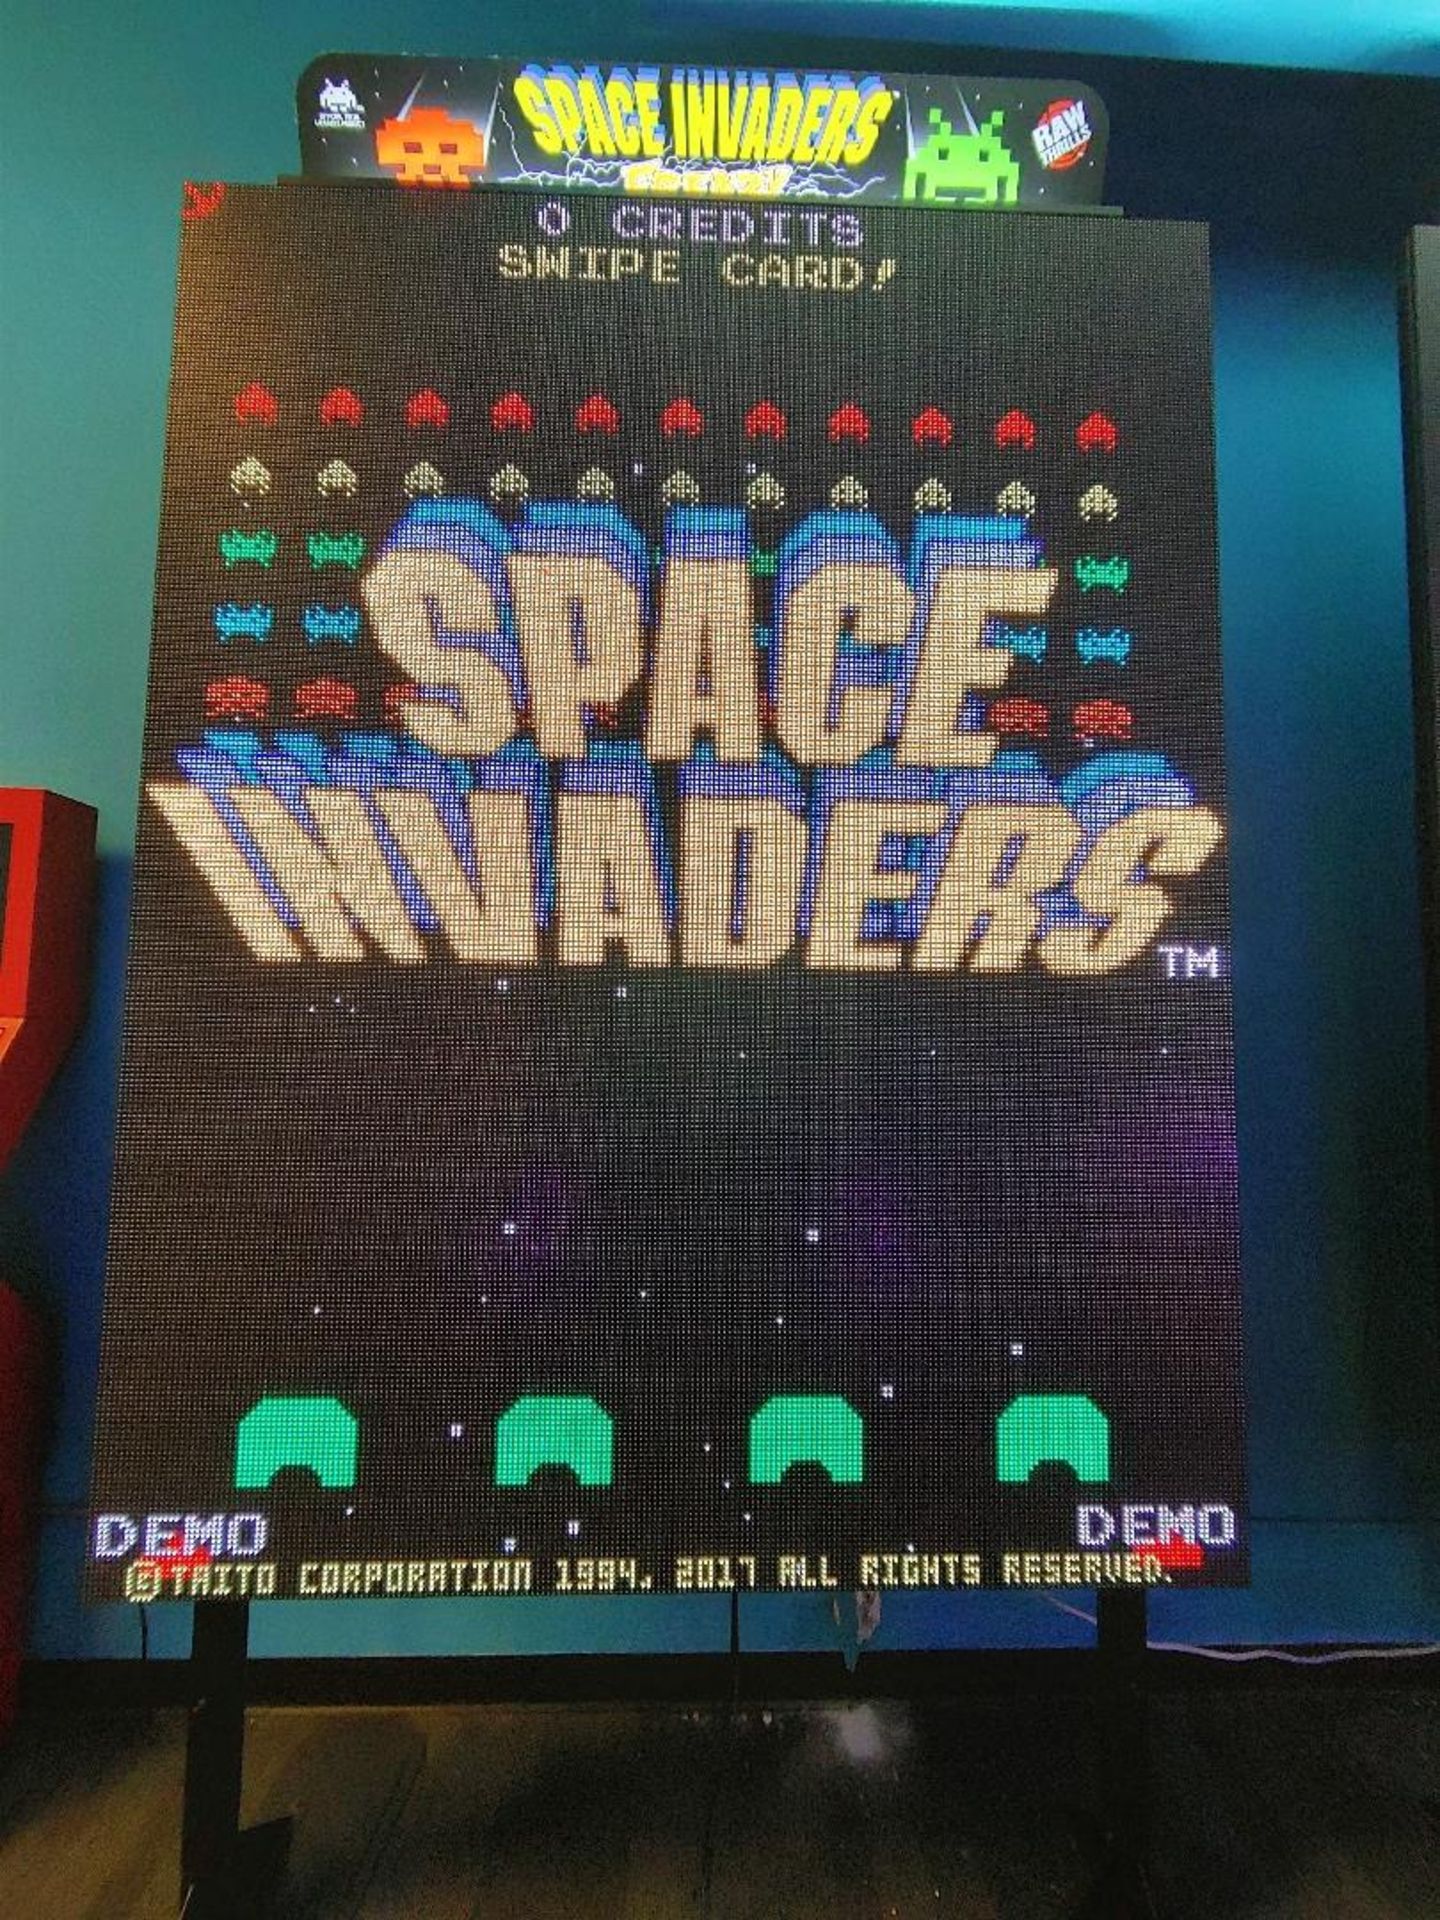 RAW THRILLS INC. SPACE INVADERS FRENZY 2 PLAYER ARCADE GAME - Image 8 of 8